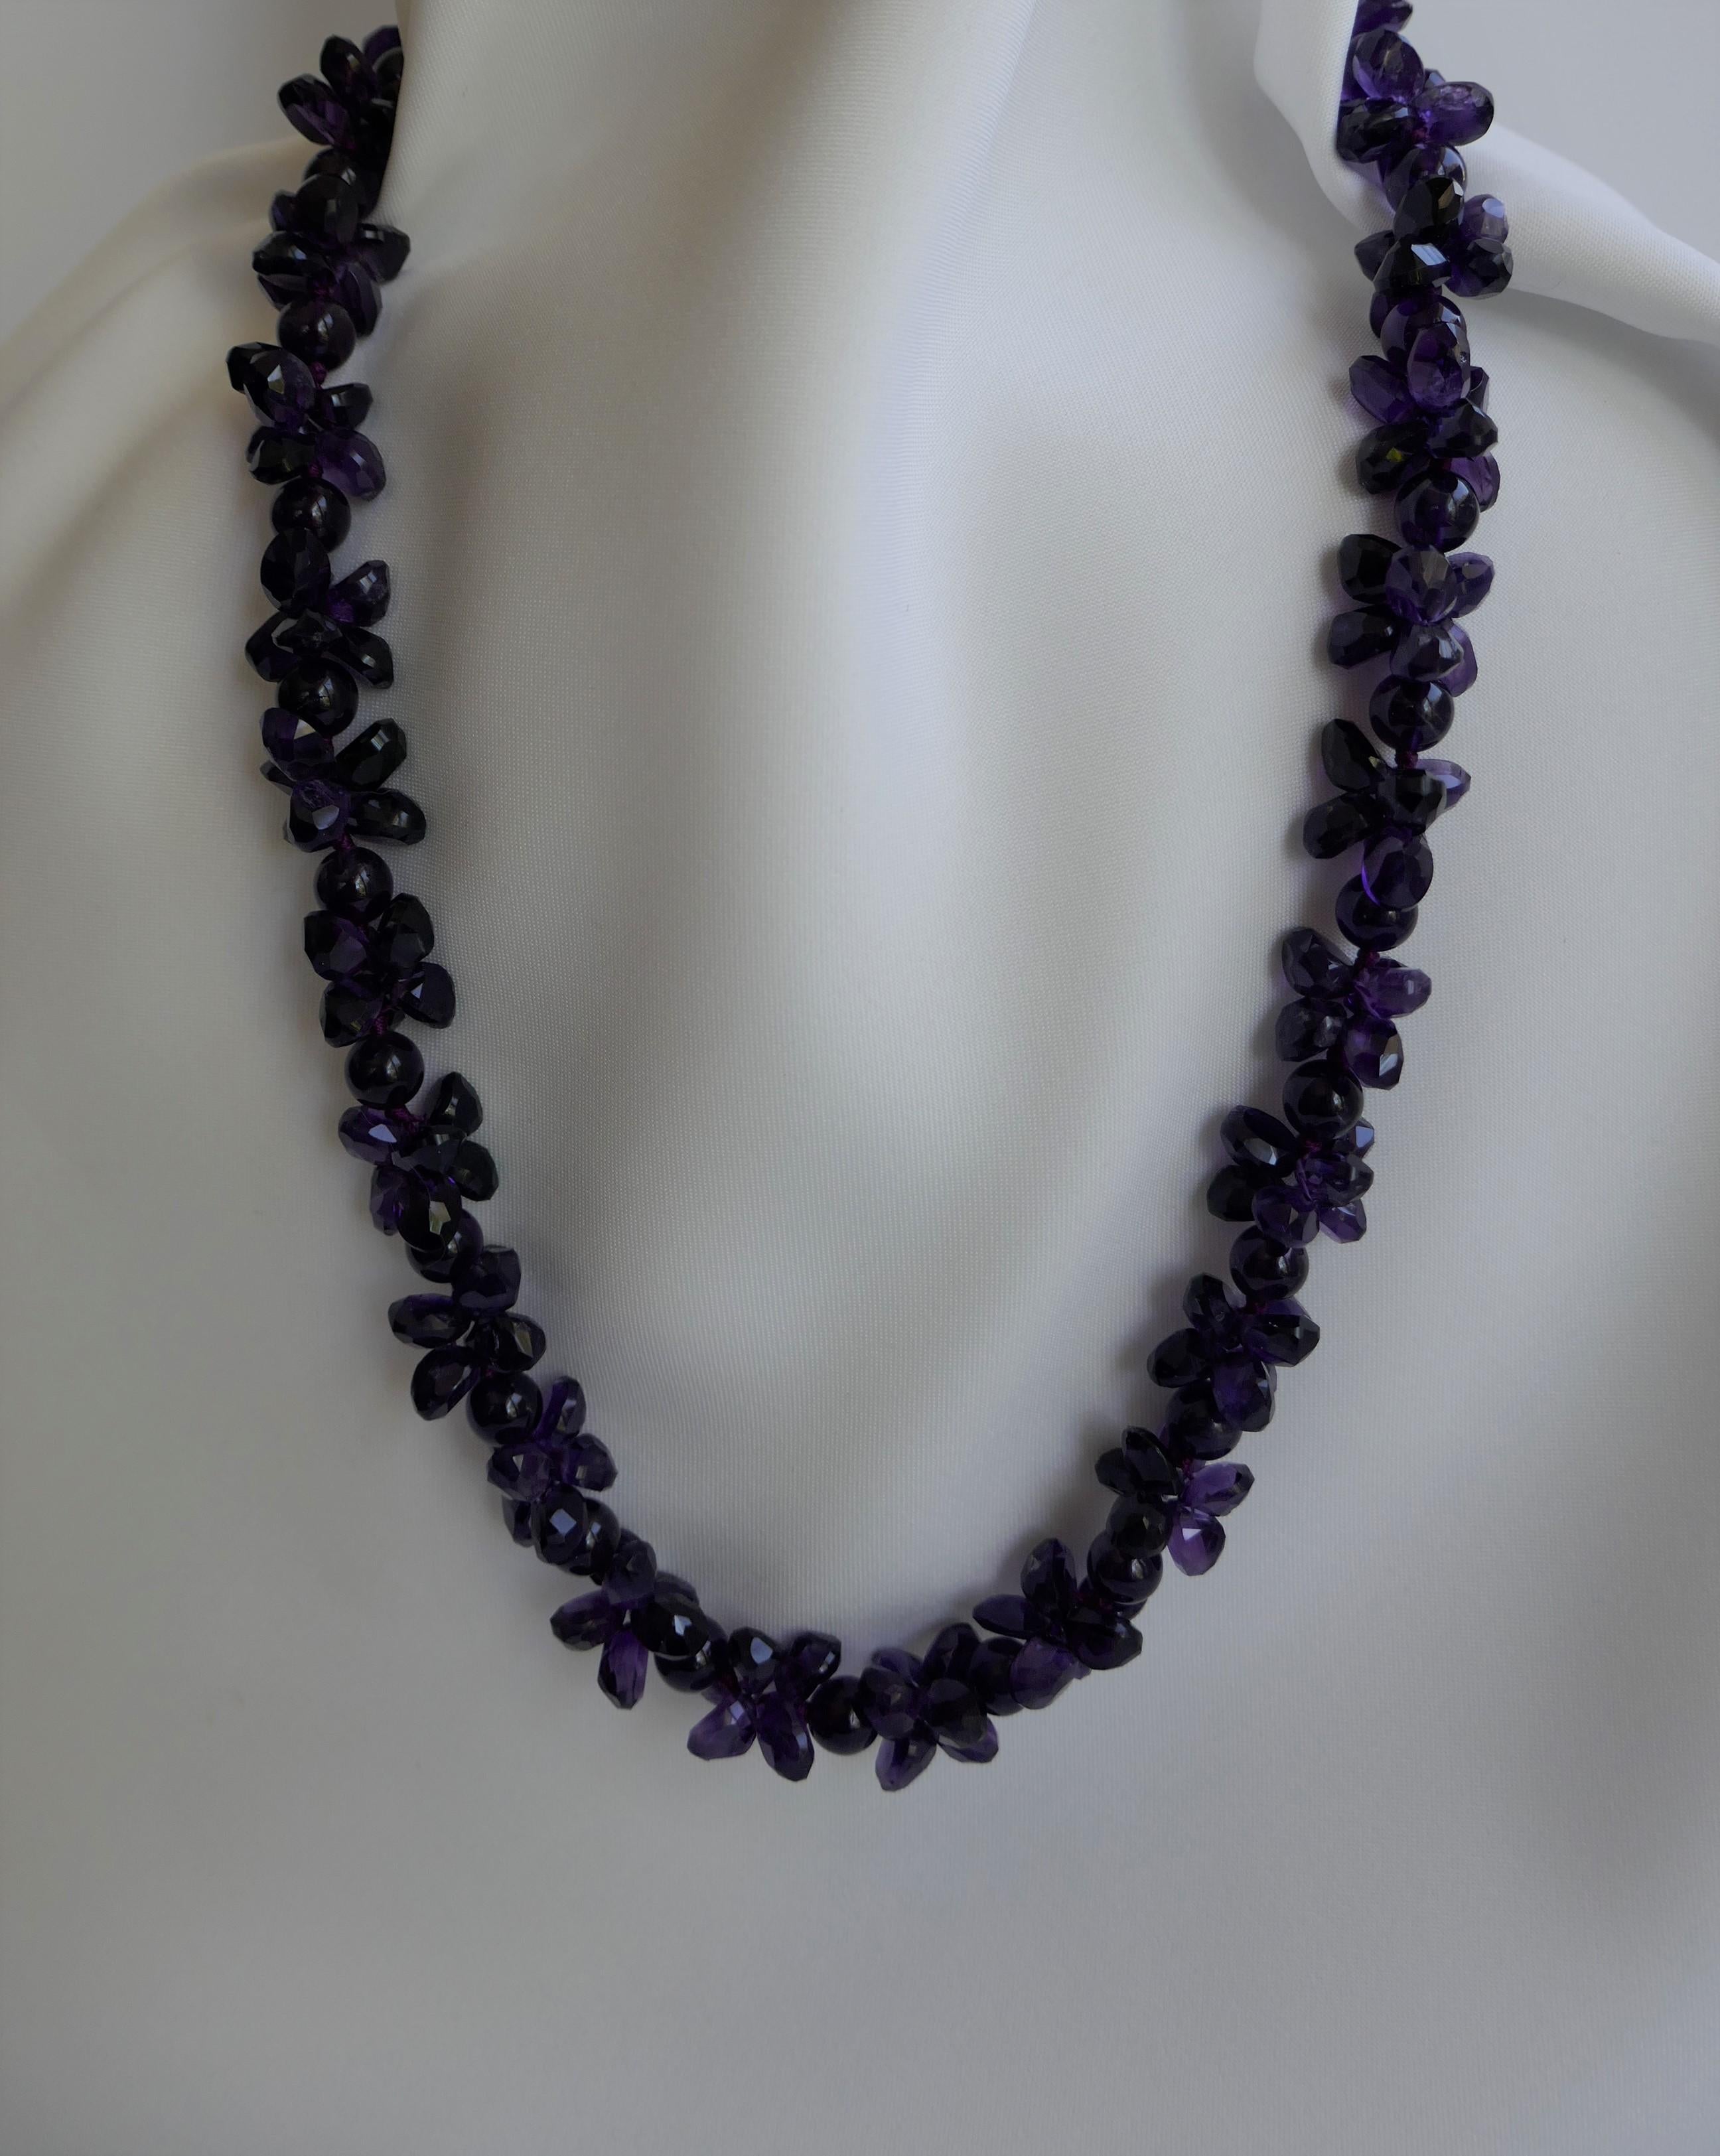 You really cant appreciate the amethyst stones in this necklace. The photograph too dark but the necklaces is stunning!!!! This amethyst necklace has two amethyst shaped stones round and faceted briolettes. It has an exclusive 925 oxidized sterling